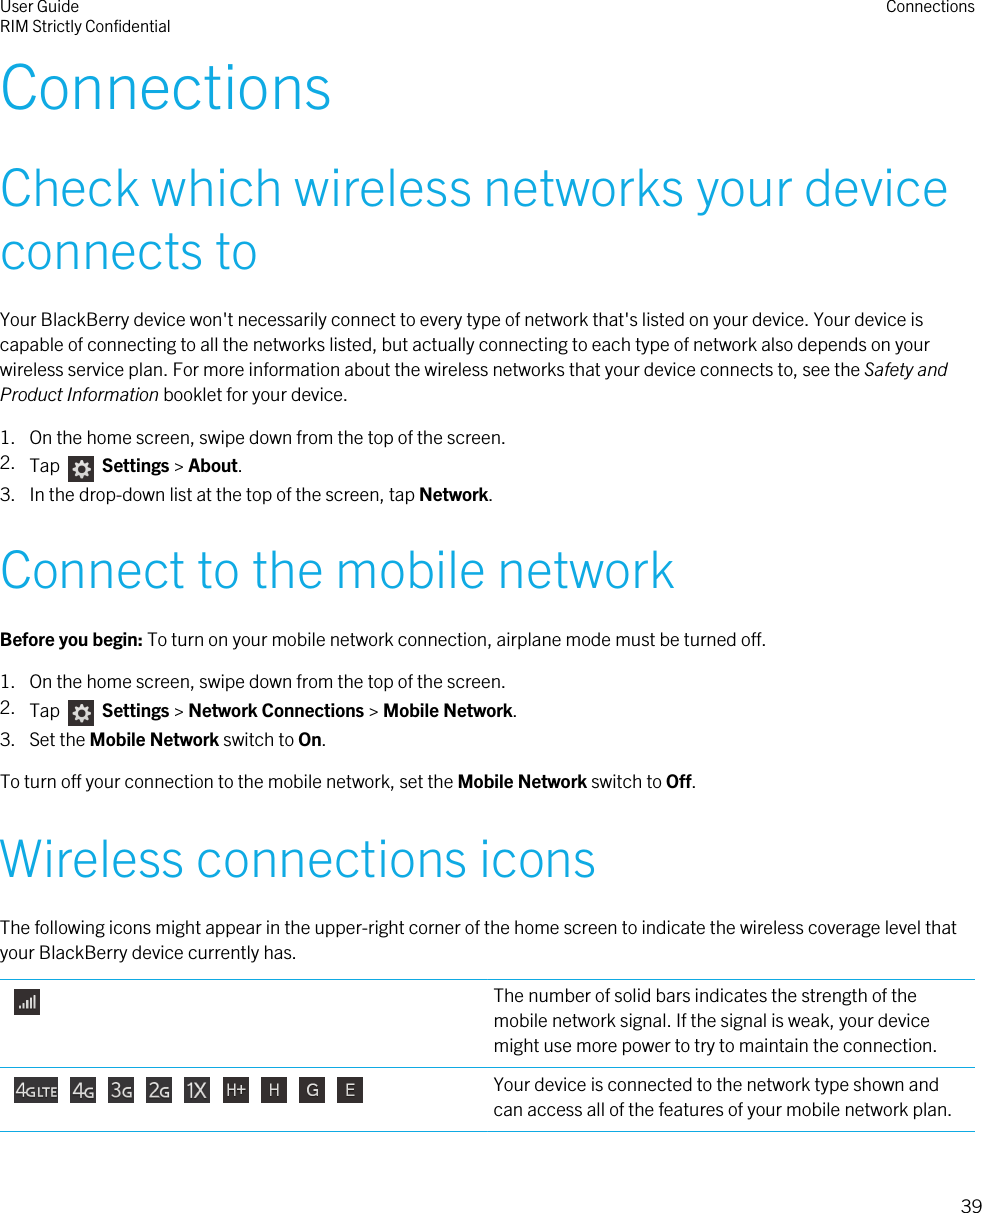 ConnectionsCheck which wireless networks your deviceconnects toYour BlackBerry device won&apos;t necessarily connect to every type of network that&apos;s listed on your device. Your device iscapable of connecting to all the networks listed, but actually connecting to each type of network also depends on yourwireless service plan. For more information about the wireless networks that your device connects to, see the Safety andProduct Information booklet for your device.1. On the home screen, swipe down from the top of the screen.2. Tap   Settings &gt; About.3. In the drop-down list at the top of the screen, tap Network.Connect to the mobile networkBefore you begin: To turn on your mobile network connection, airplane mode must be turned off.1. On the home screen, swipe down from the top of the screen.2. Tap    Settings &gt; Network Connections &gt; Mobile Network.3. Set the Mobile Network switch to On.To turn off your connection to the mobile network, set the Mobile Network switch to Off.Wireless connections iconsThe following icons might appear in the upper-right corner of the home screen to indicate the wireless coverage level thatyour BlackBerry device currently has. The number of solid bars indicates the strength of themobile network signal. If the signal is weak, your devicemight use more power to try to maintain the connection.                  Your device is connected to the network type shown andcan access all of the features of your mobile network plan.User GuideRIM Strictly Confidential Connections39